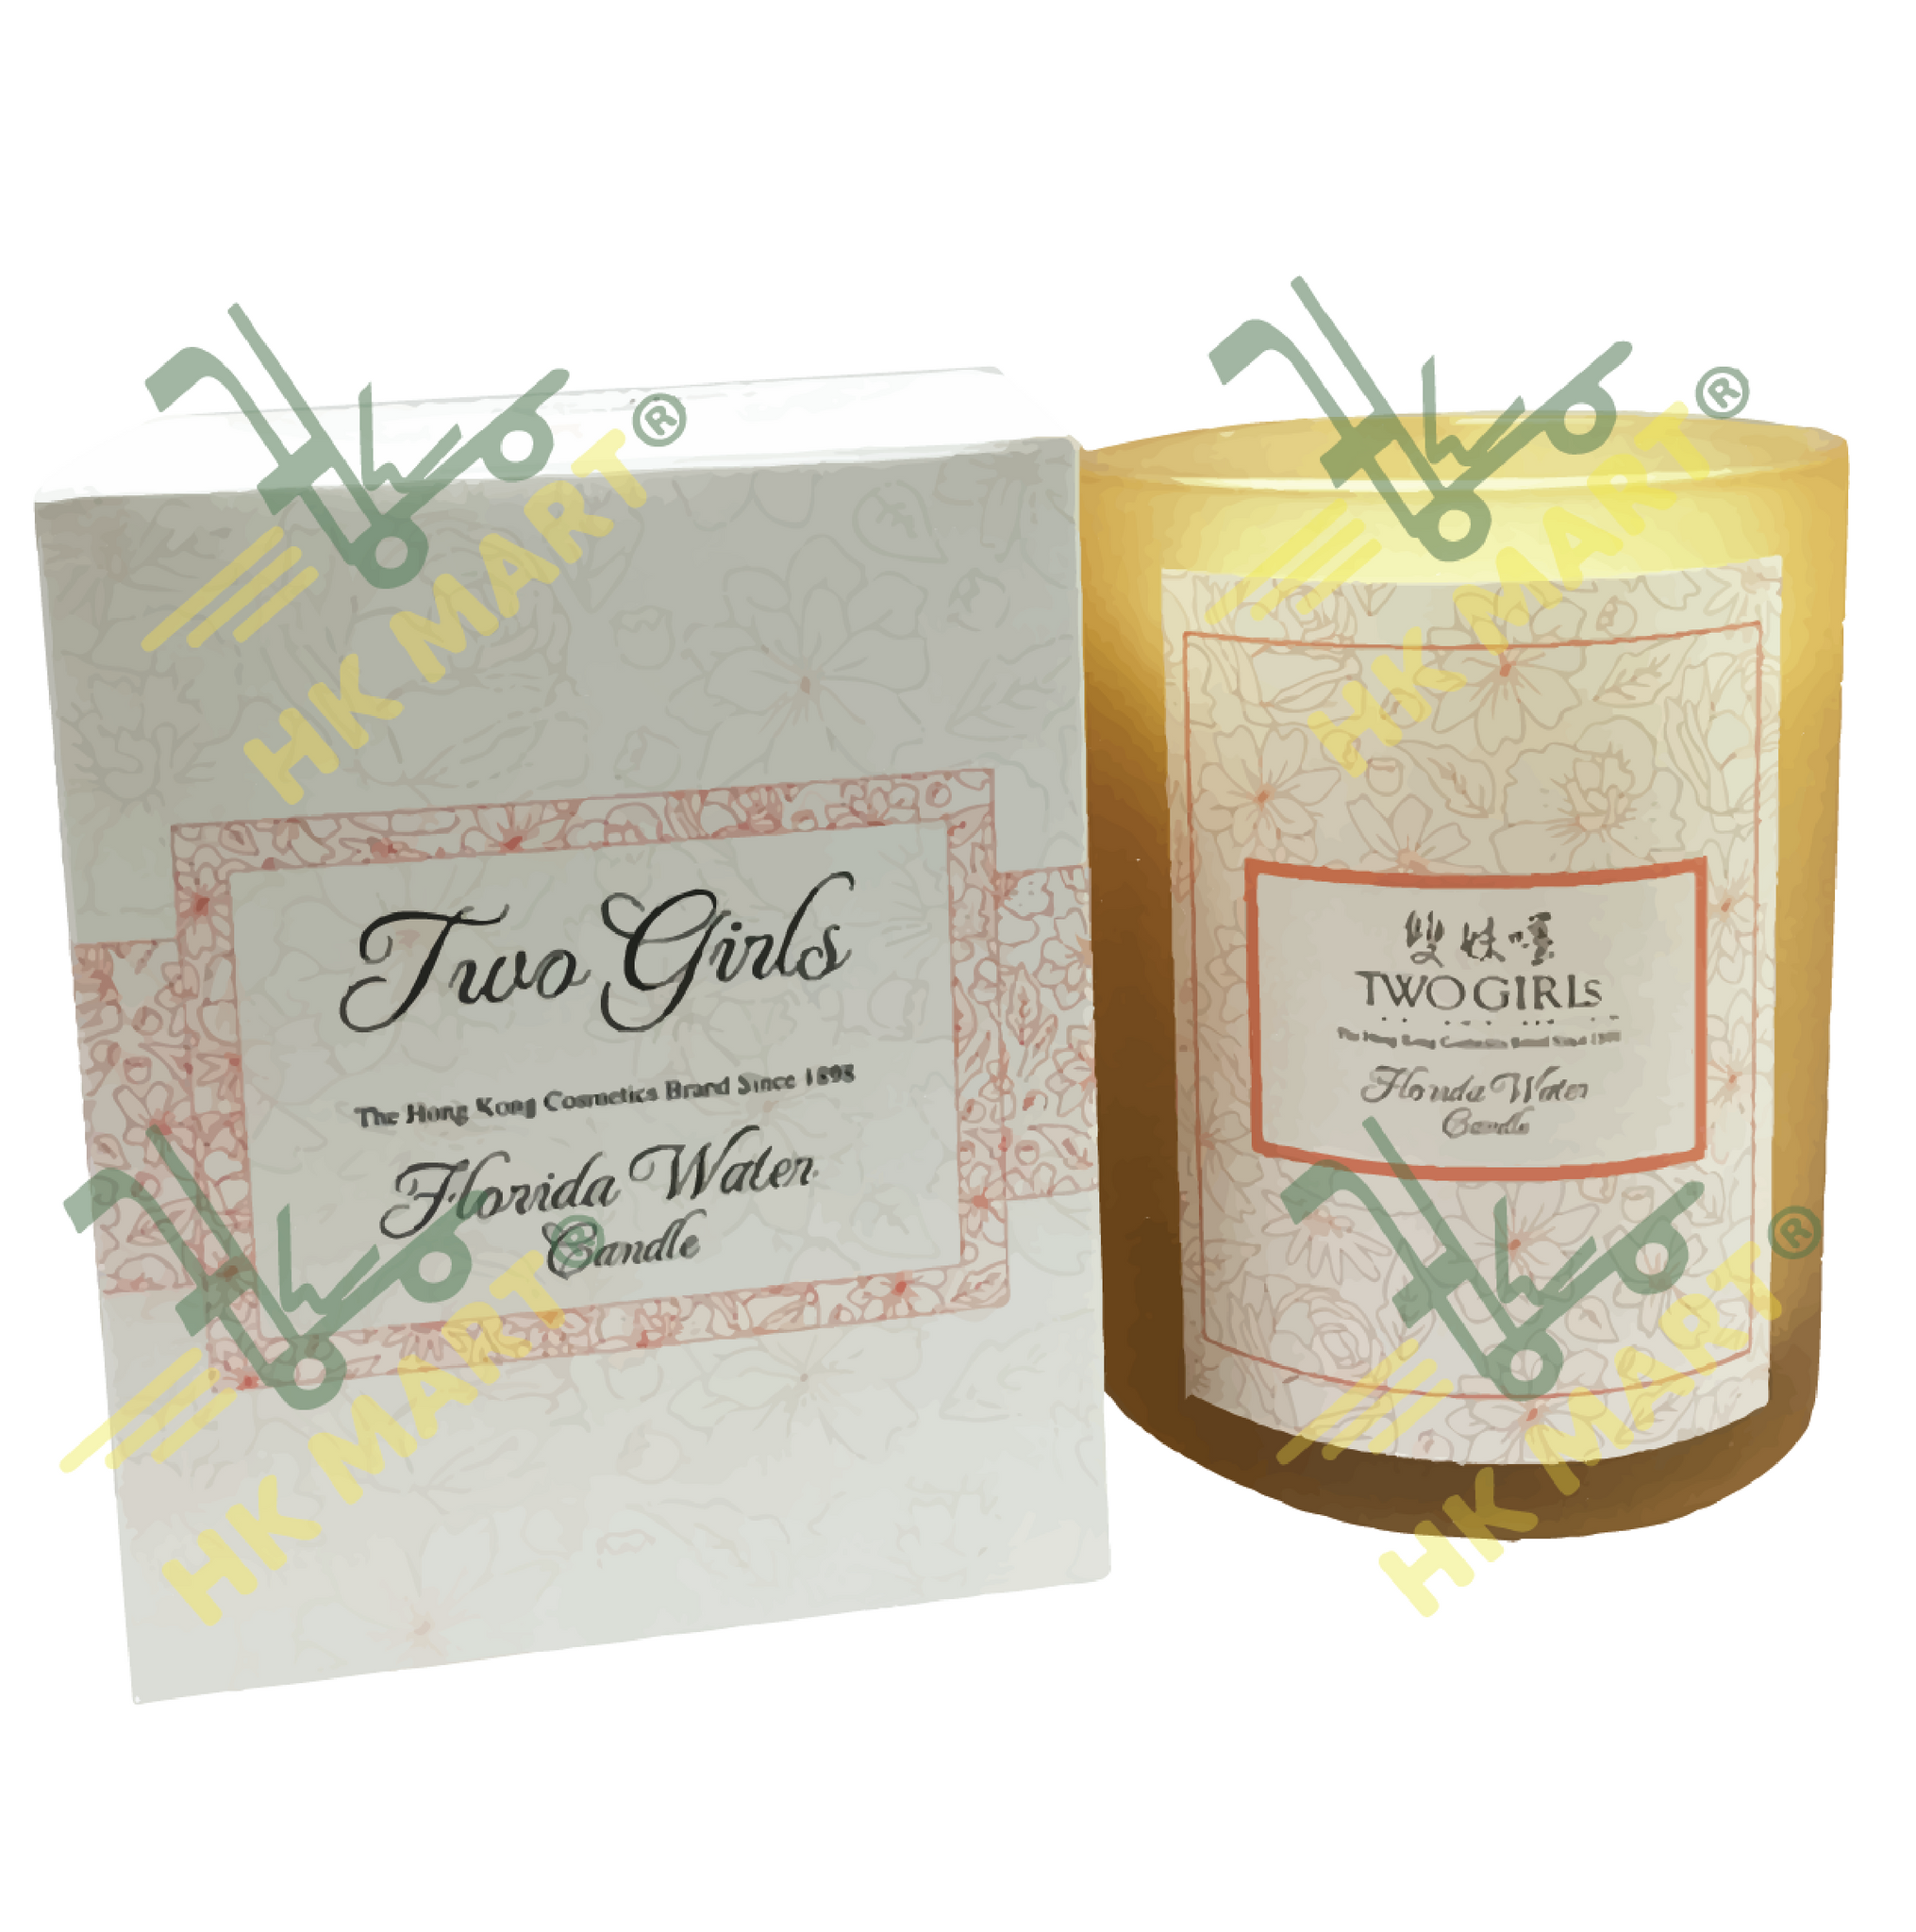 Two Girls Florida Water Glass Candle 510G (Orange Color) 雙妹嘜 花露水香味蠟燭 510克 (橙色)